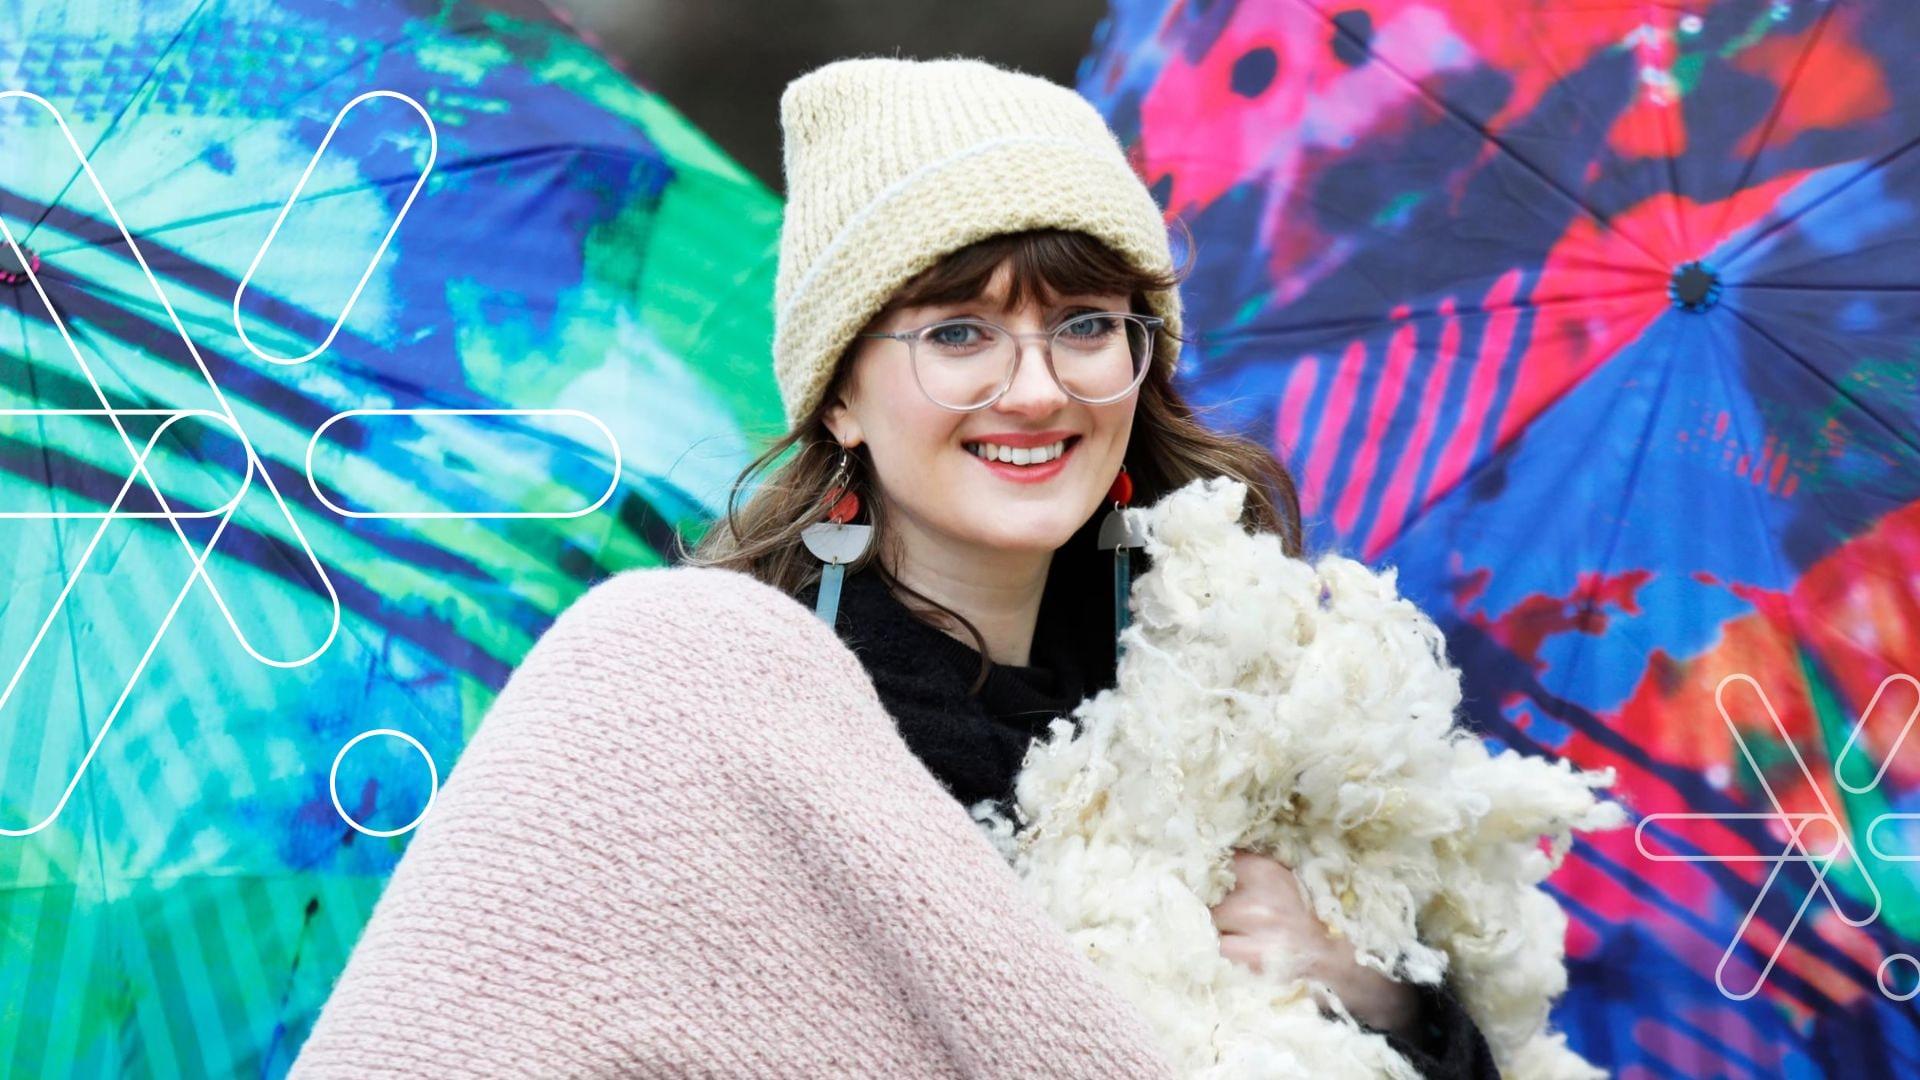 One of the judges Sophie Reynolds pictured with some of the products by designers ,Handknit wool blankets and hat from Eriu and Umbrellas by Clare O’Connell who will entre the Design at Design & Crafts Council Ireland (DCCI) Business Design Challenge competition . DCCI officially opened the public voting for this year’s Irish Business Design. Now in its third year, the Irish Business Design Challenge 2023 (IBDC) focuses on companies that have used design thinking to future proof their business by making it more sustainable and energy efficient. There is a combined prize fund of over €50,000. Visit https://www.dcci.ie/ibdc-2023 for more information and to vote on shortlisted businesses. Photo: Leon Farrell/Photocall Ireland